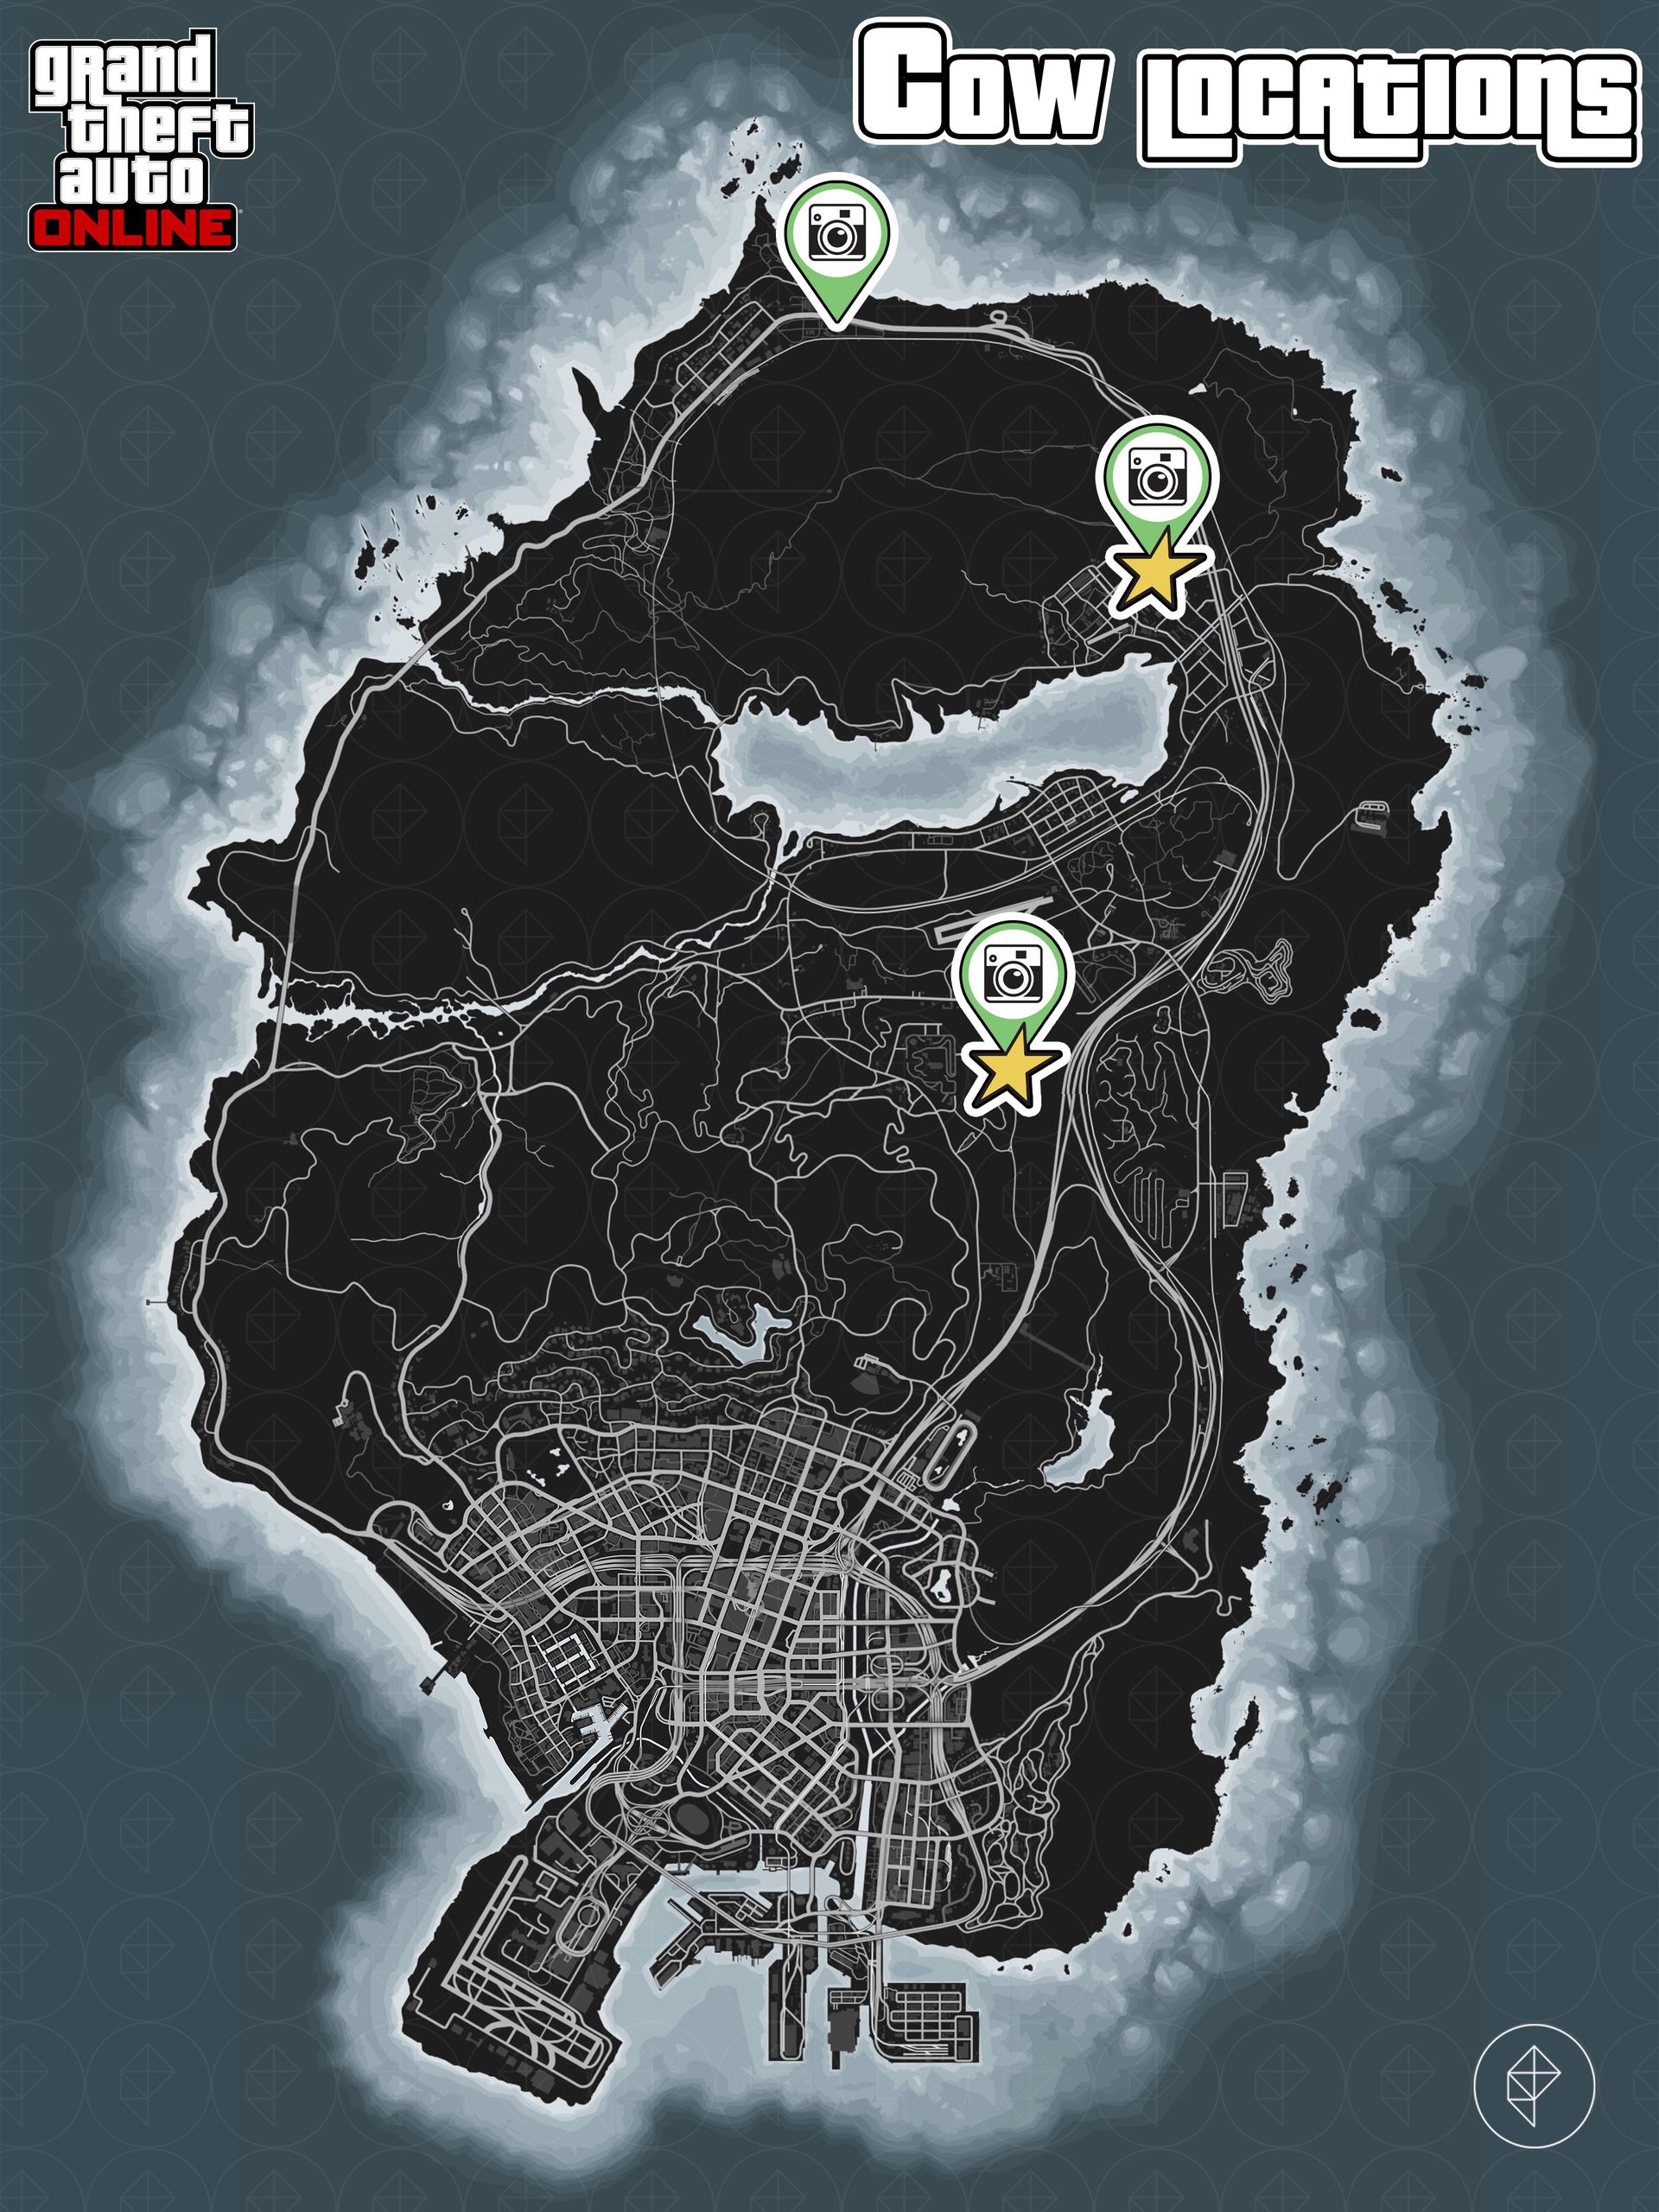 GTA Online map showing cow locations